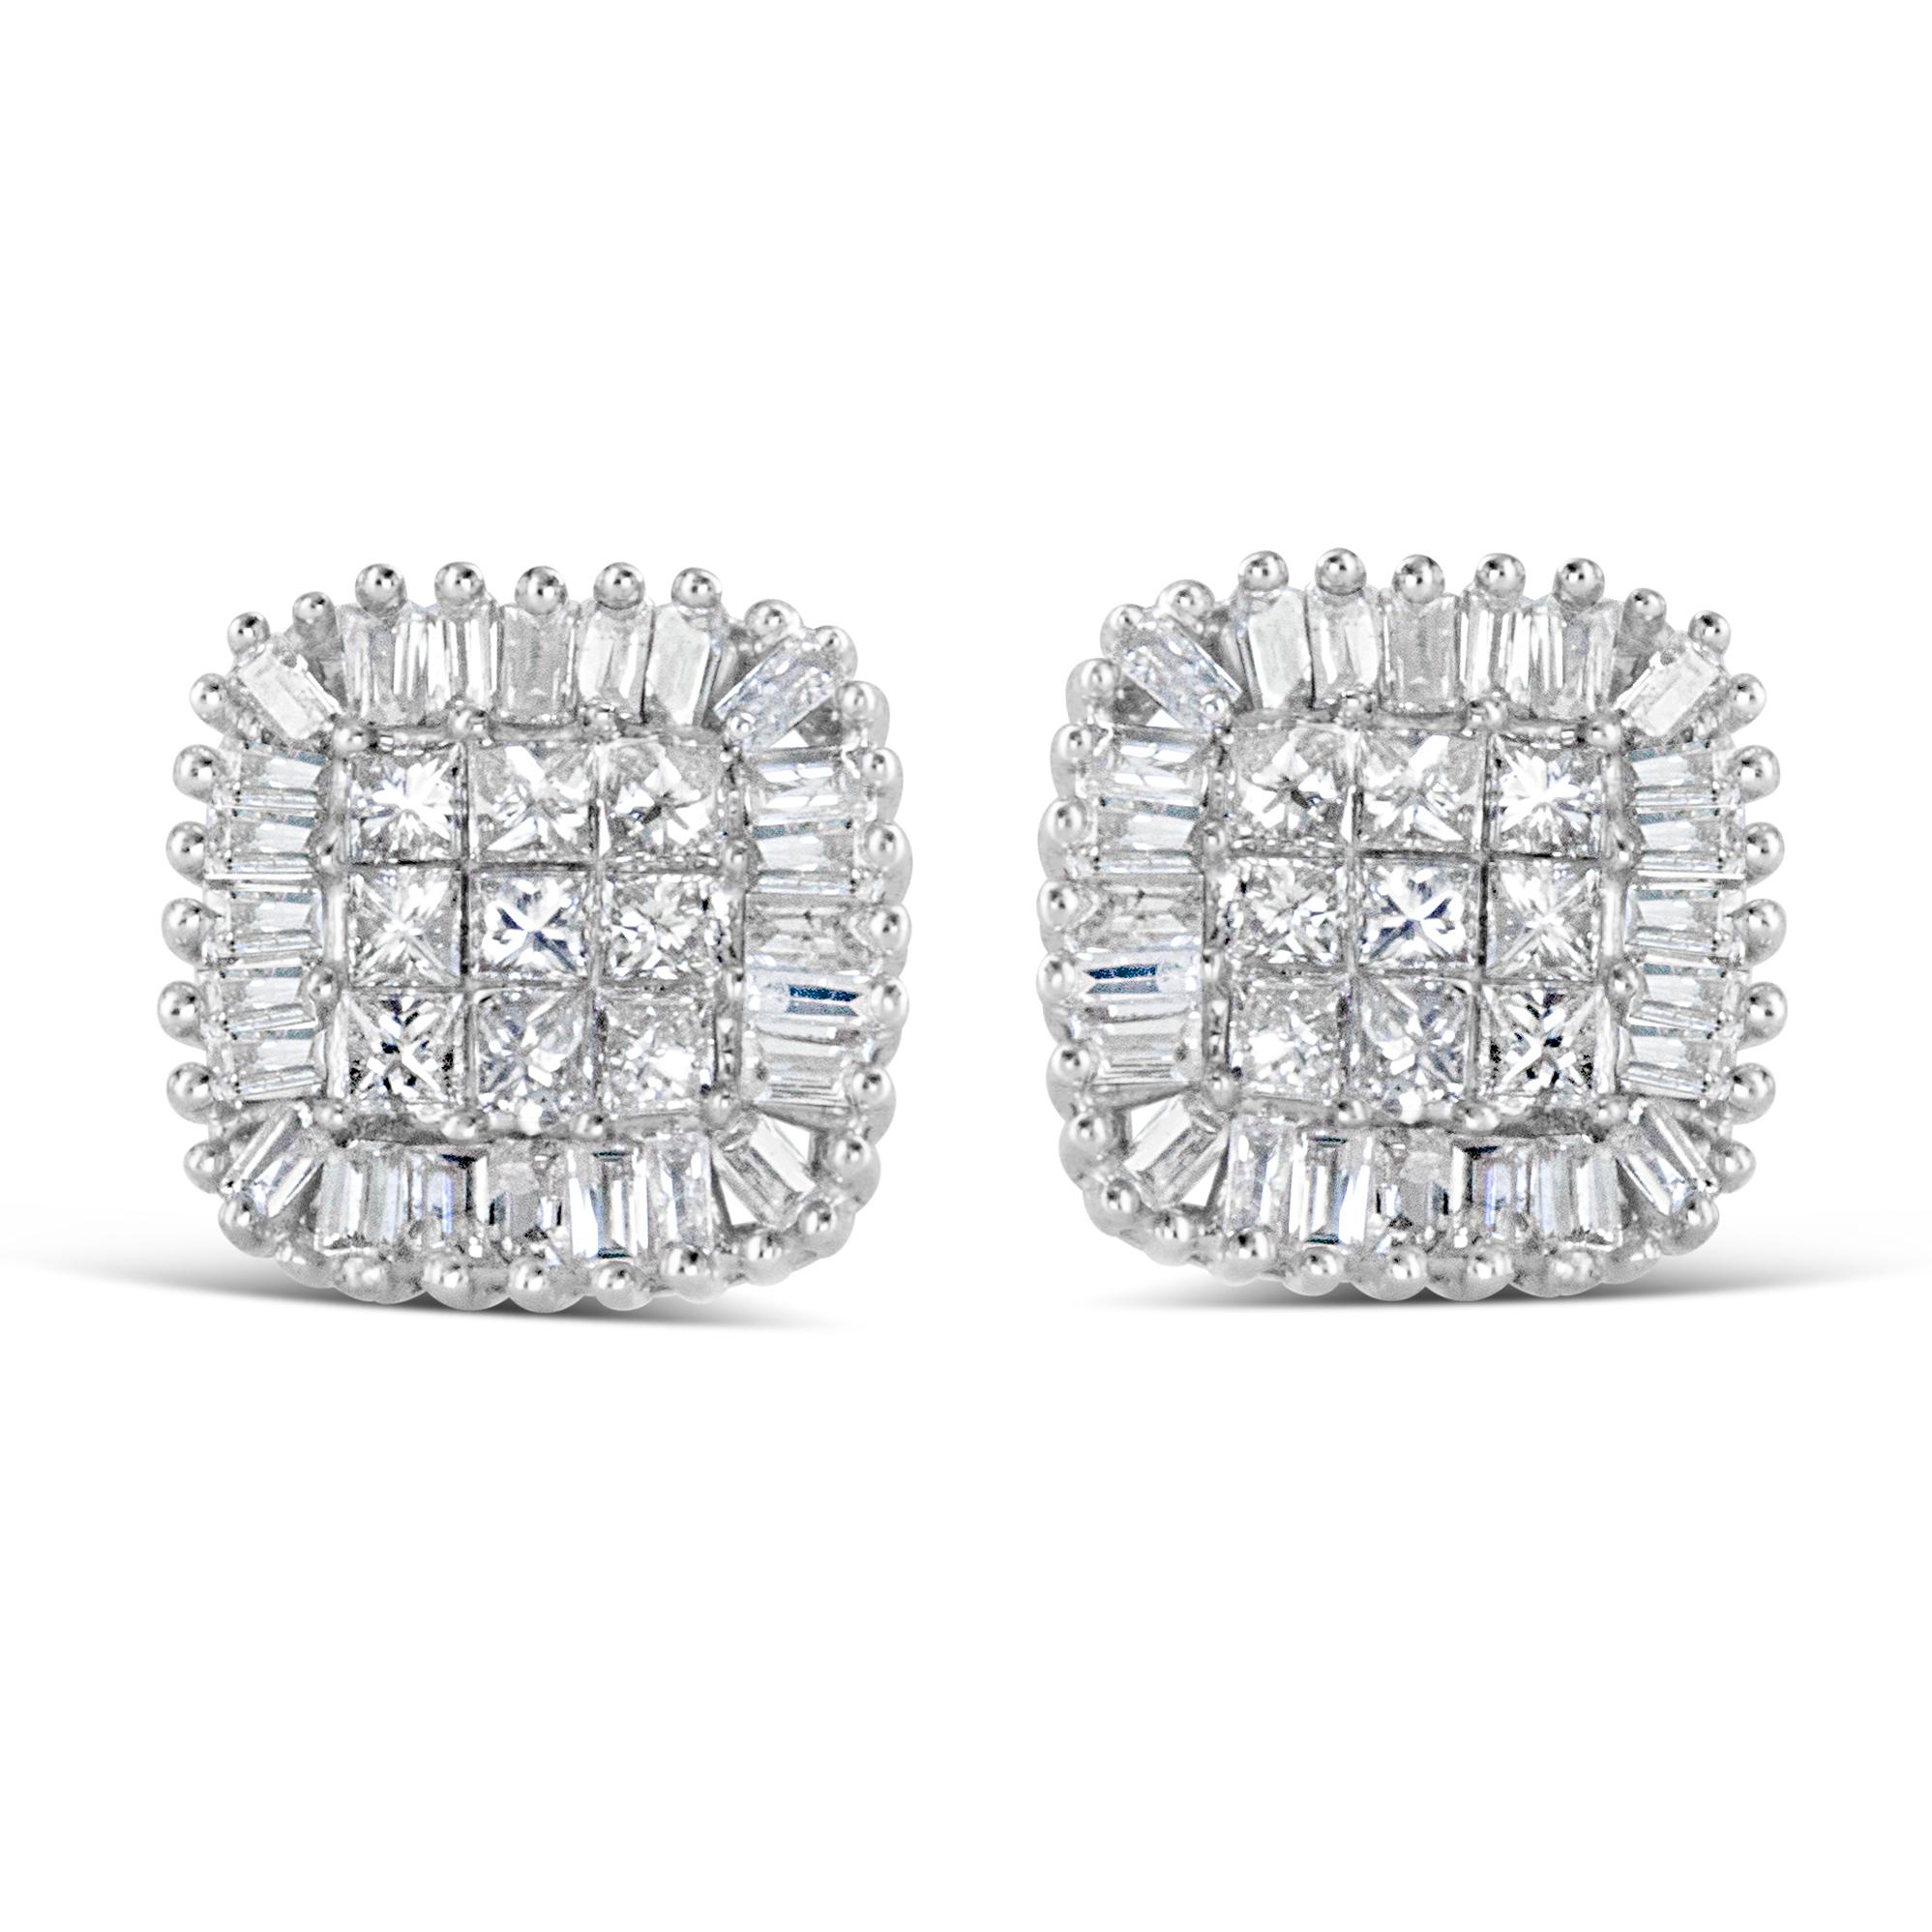 From the princess cut diamonds to the baguette diamonds that line the edges, these stud earrings radiate sparkle. The princess diamonds sit cleverly in an invisible setting that perfectly showcases the sparkling stones and the precious metal of the